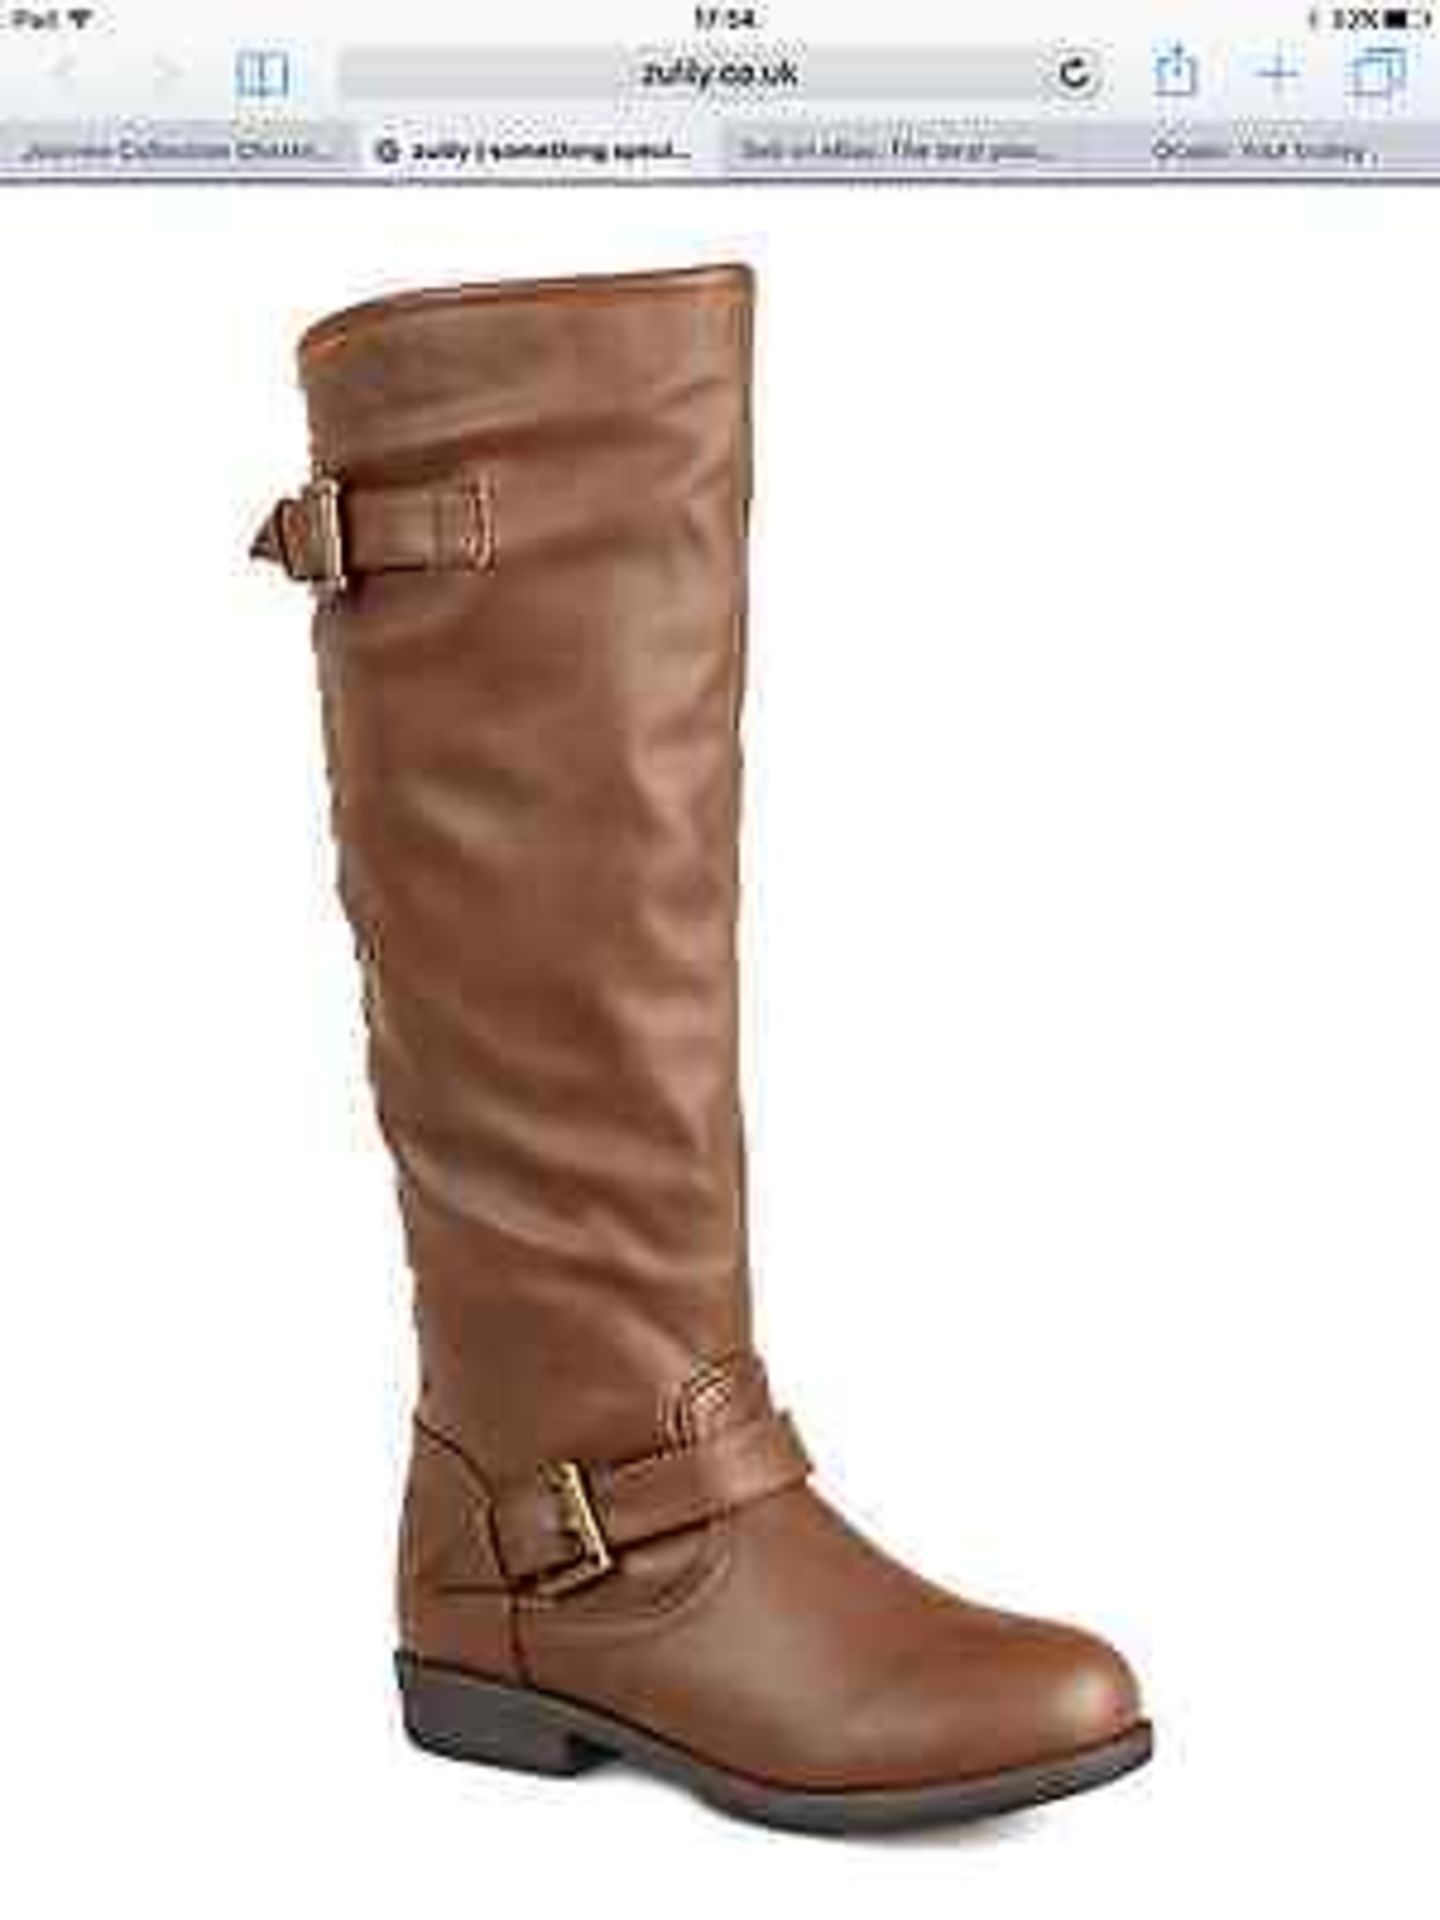 Journee Collection Chestnut Spokane Extra-Wide Calf Boot, Size Eur 39.5 (New with box)